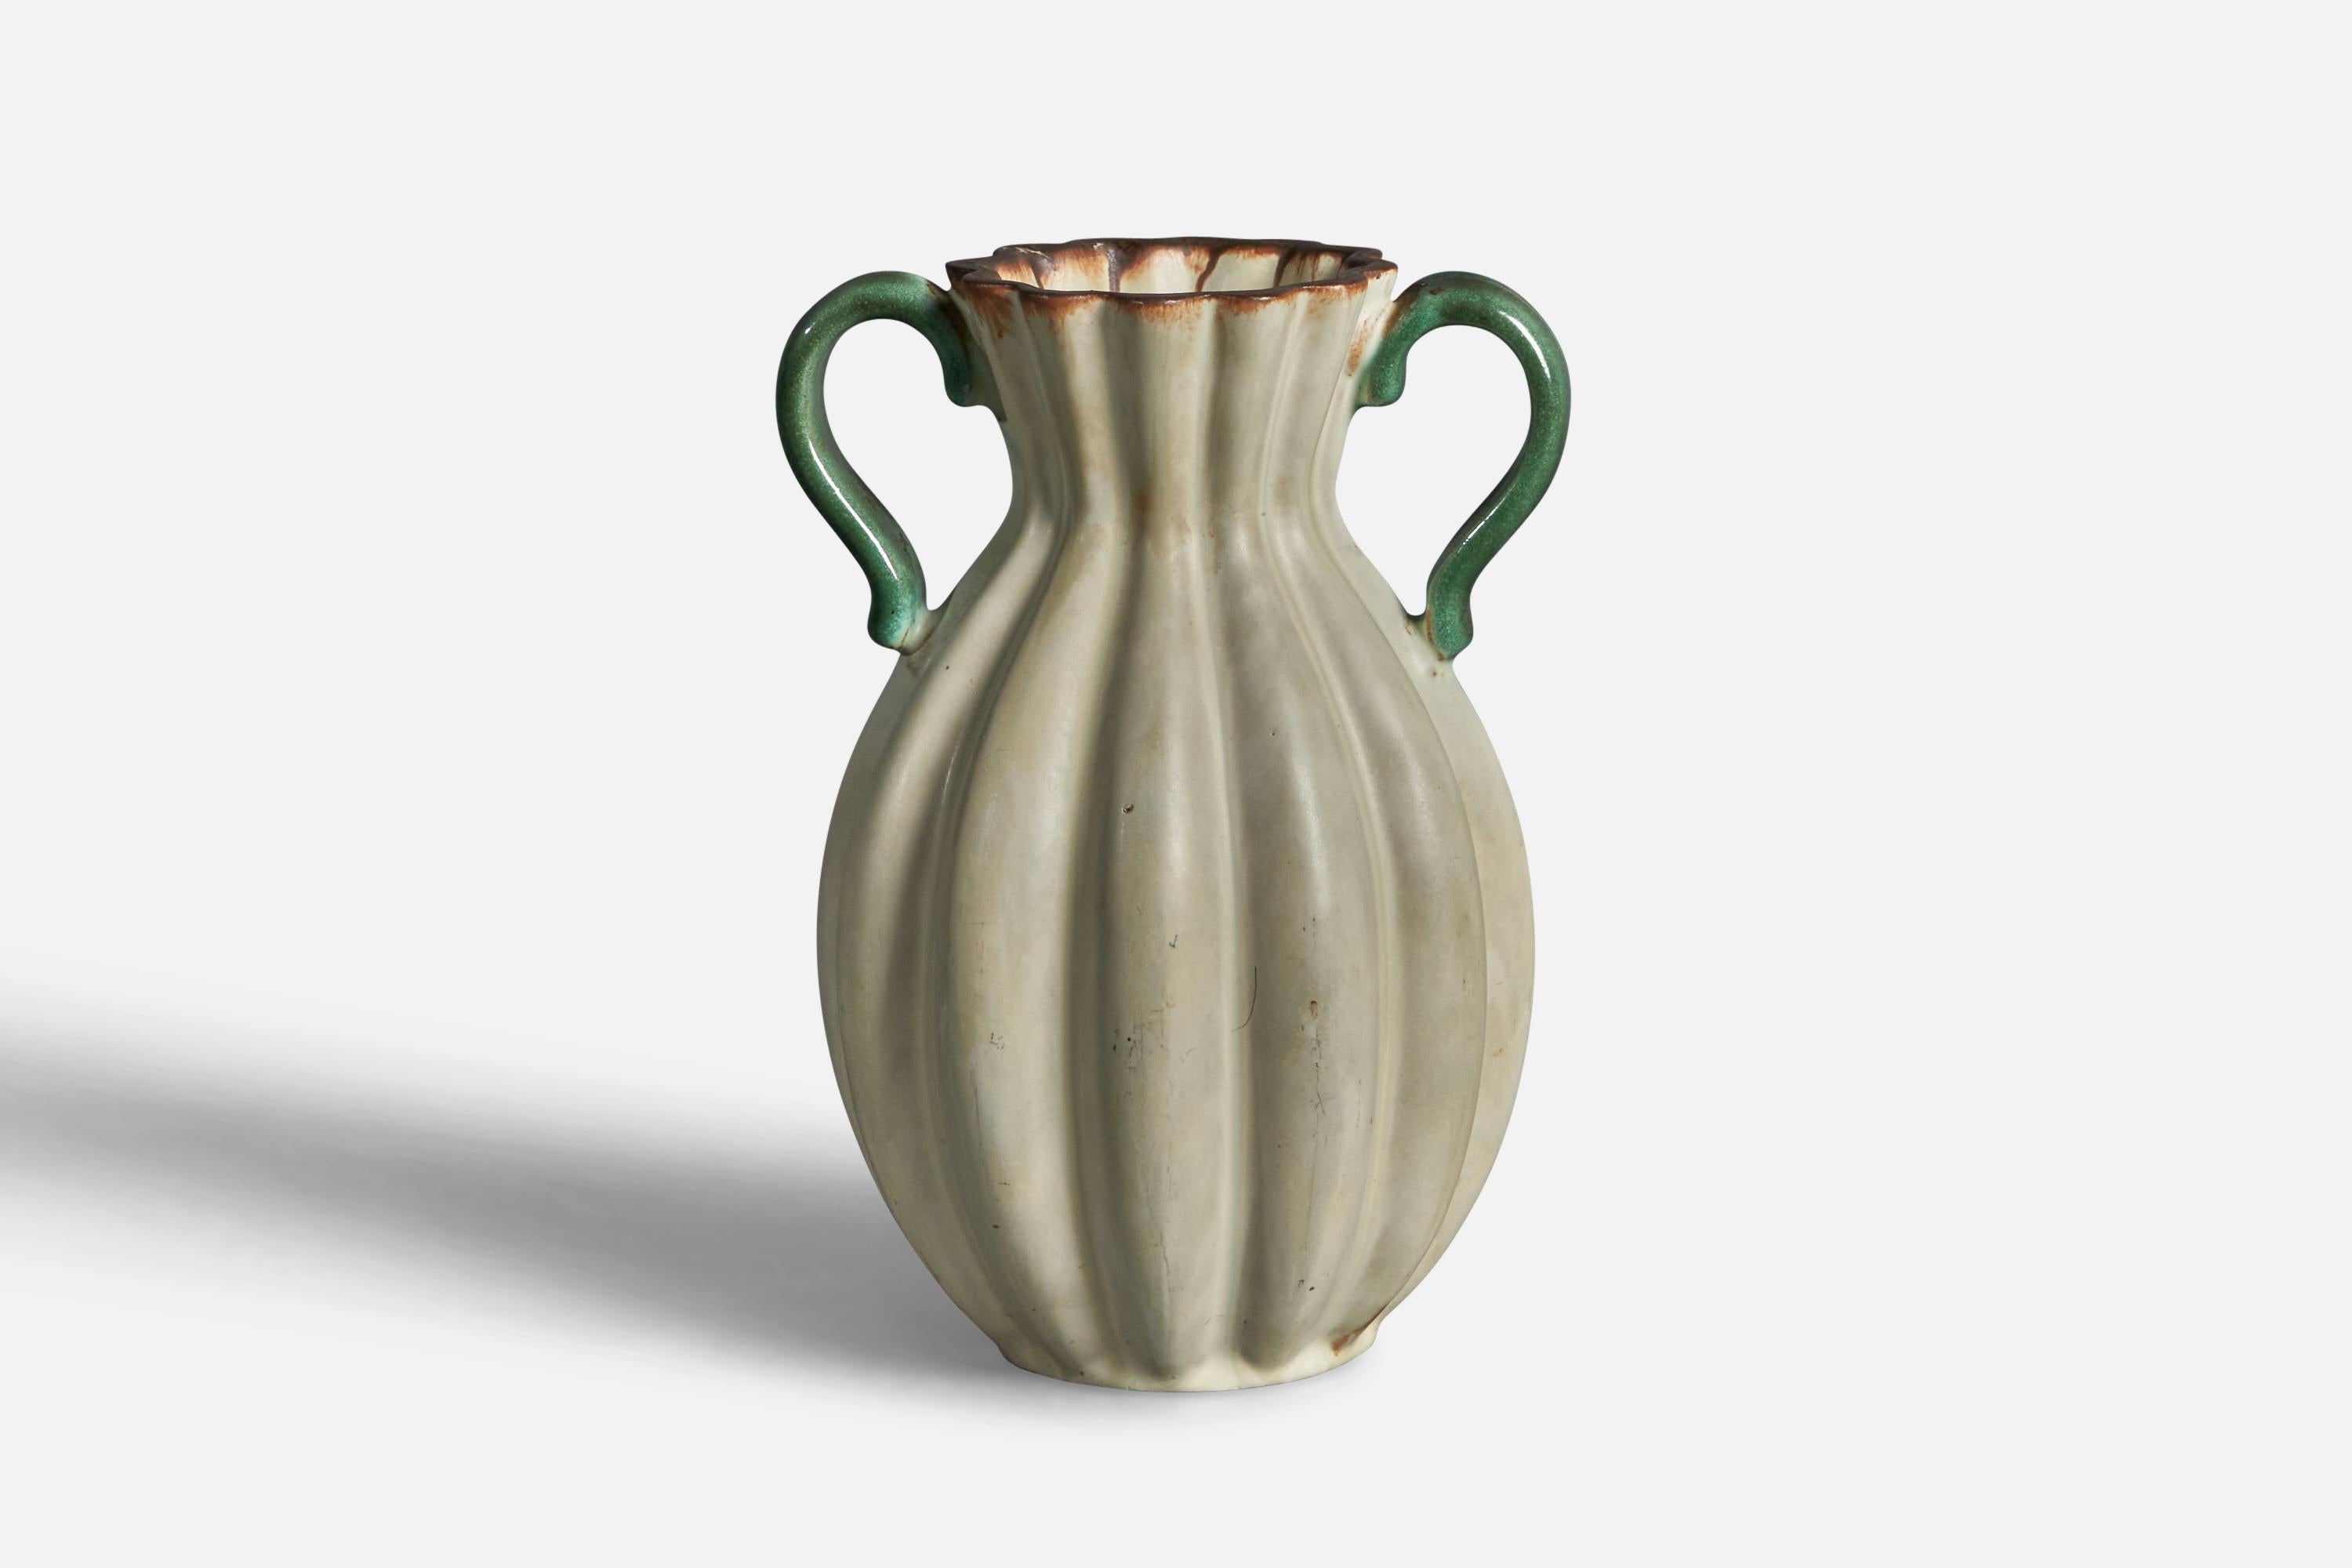 A green and white-glazed earthenware vase designed and produced by Upsala Ekeby, Sweden, 1930s.